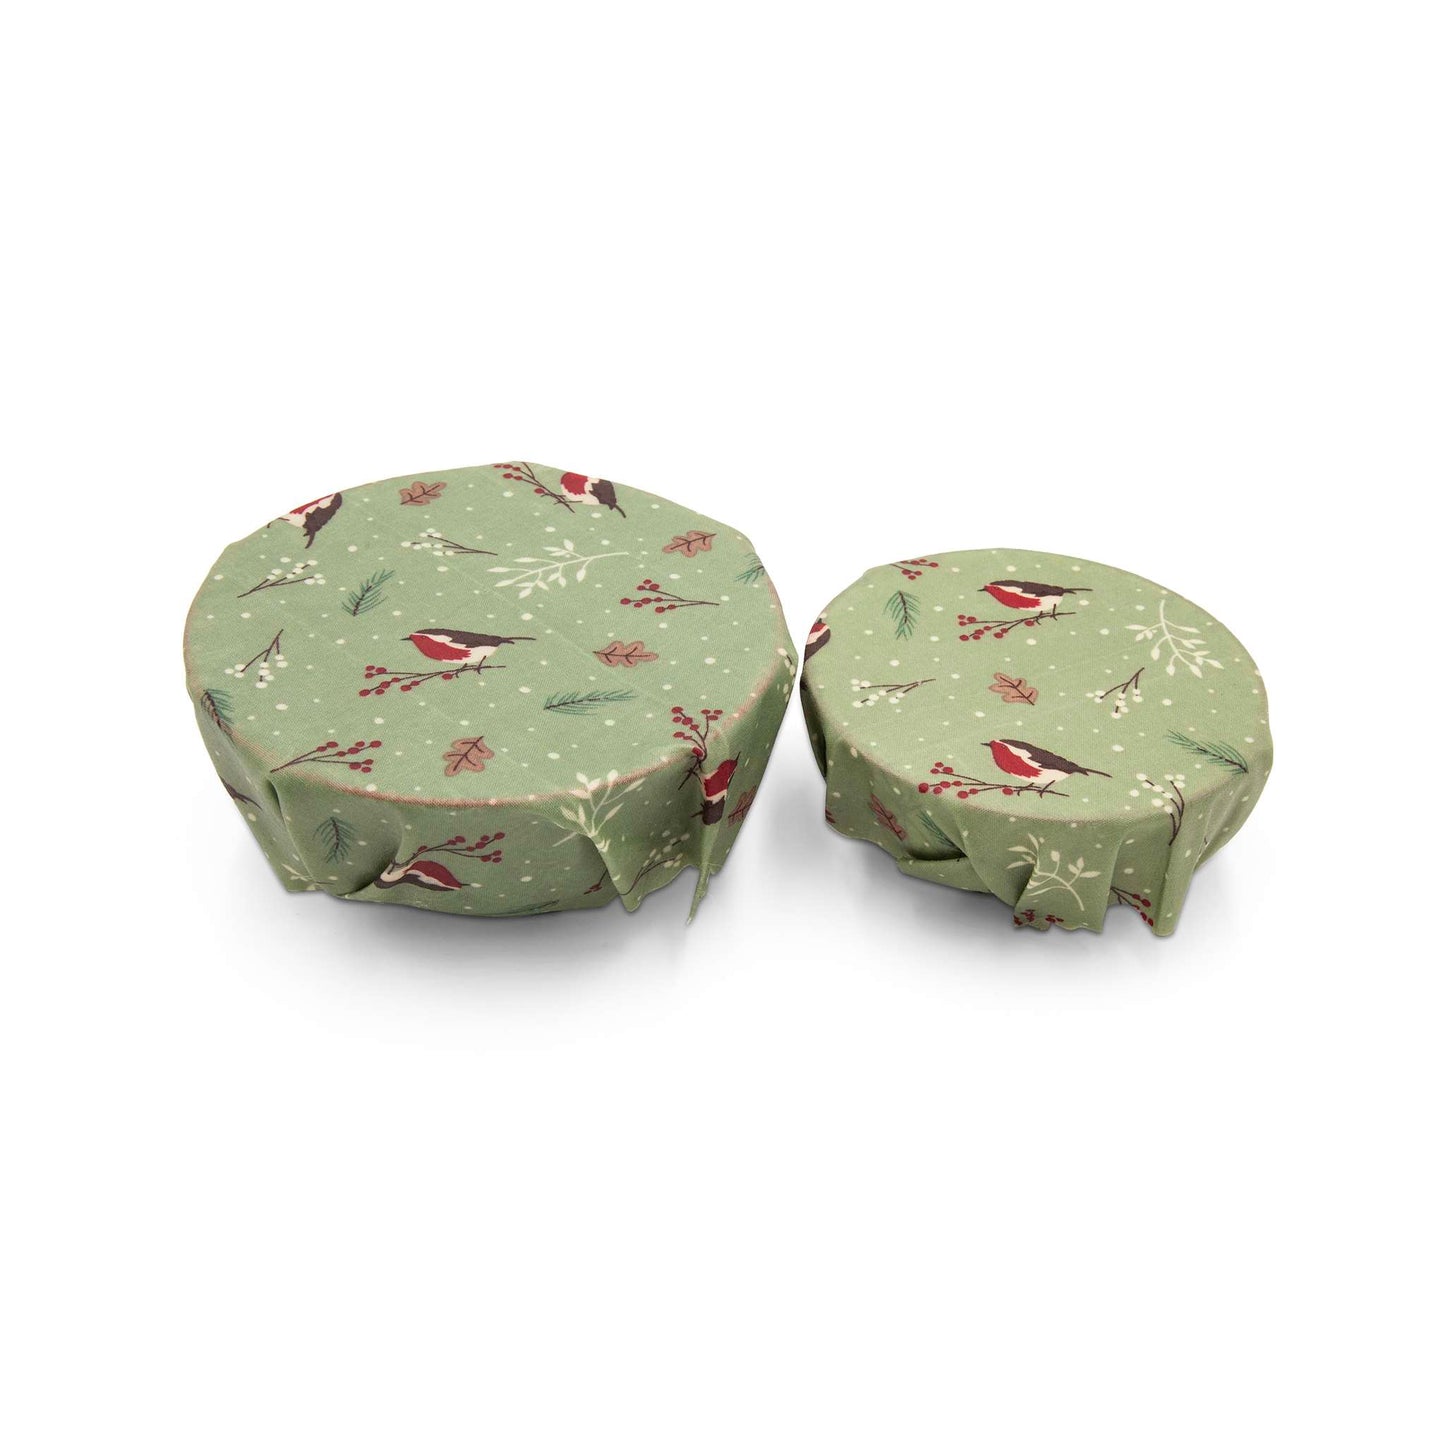 Load image into Gallery viewer, Faerly Food Wrap Beeswax Reusable Food Wraps - Single Large Wrap
